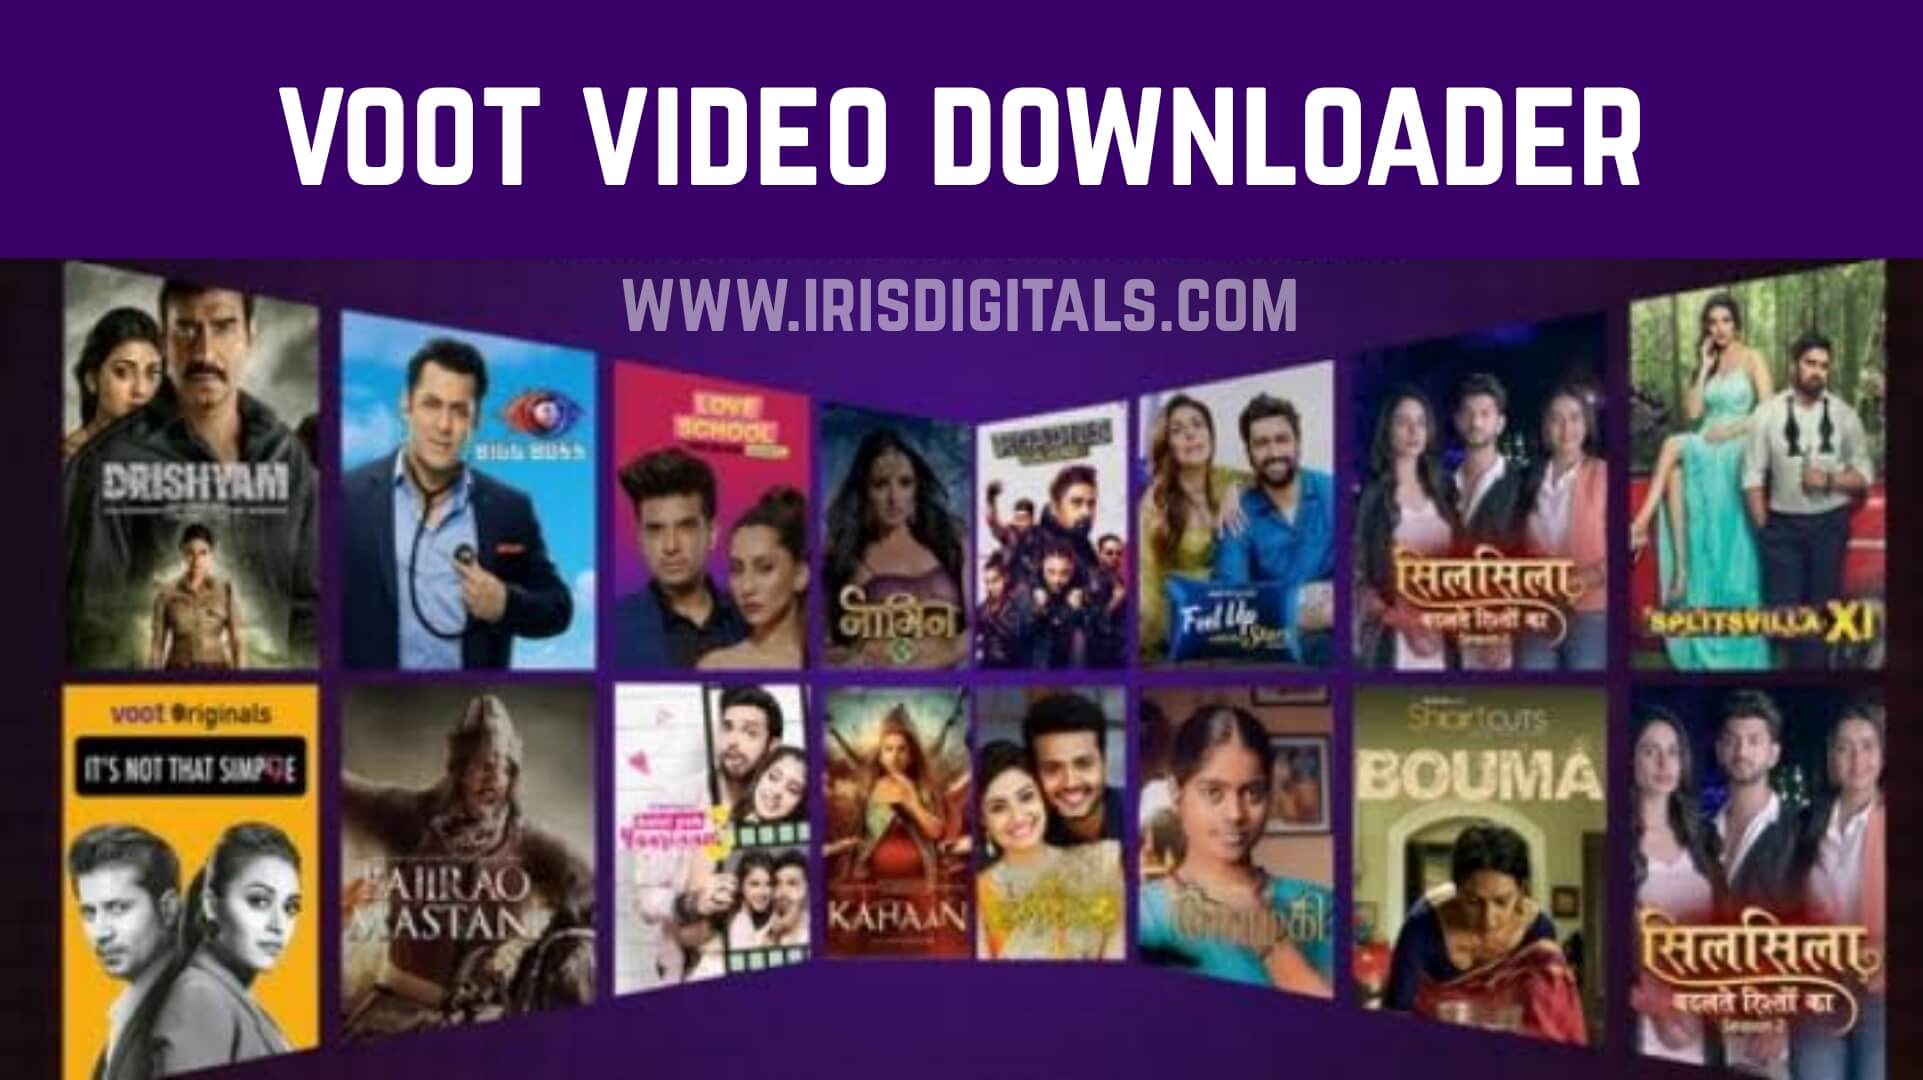 Download VOOT Videos on PC Laptop Android & IOS Voot video downloader